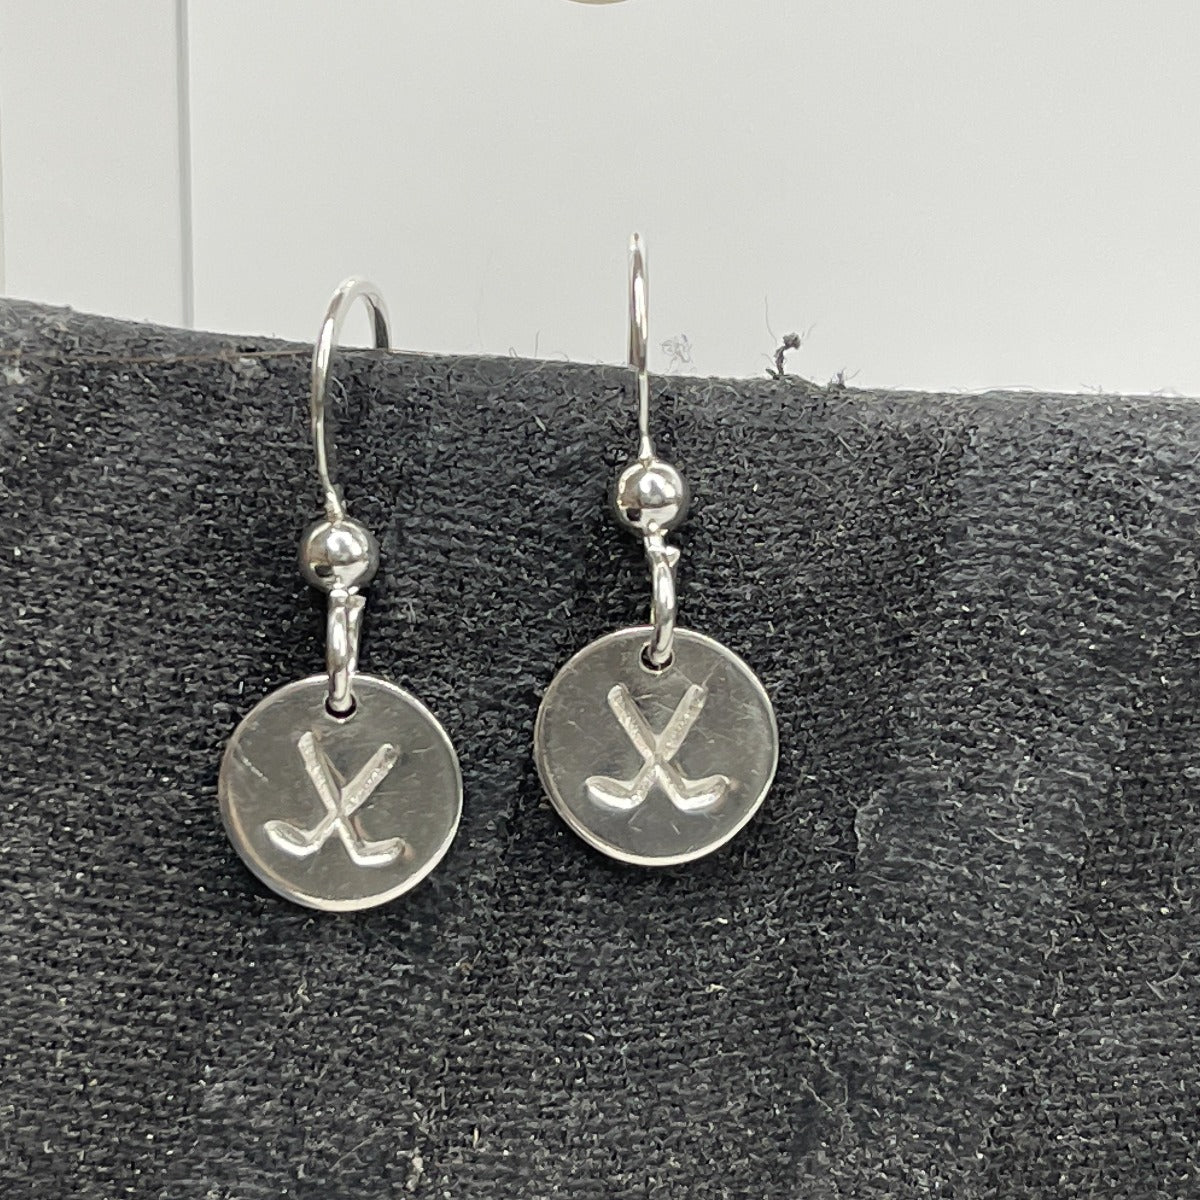 Hand stamped sterling silver hockey stick earrings